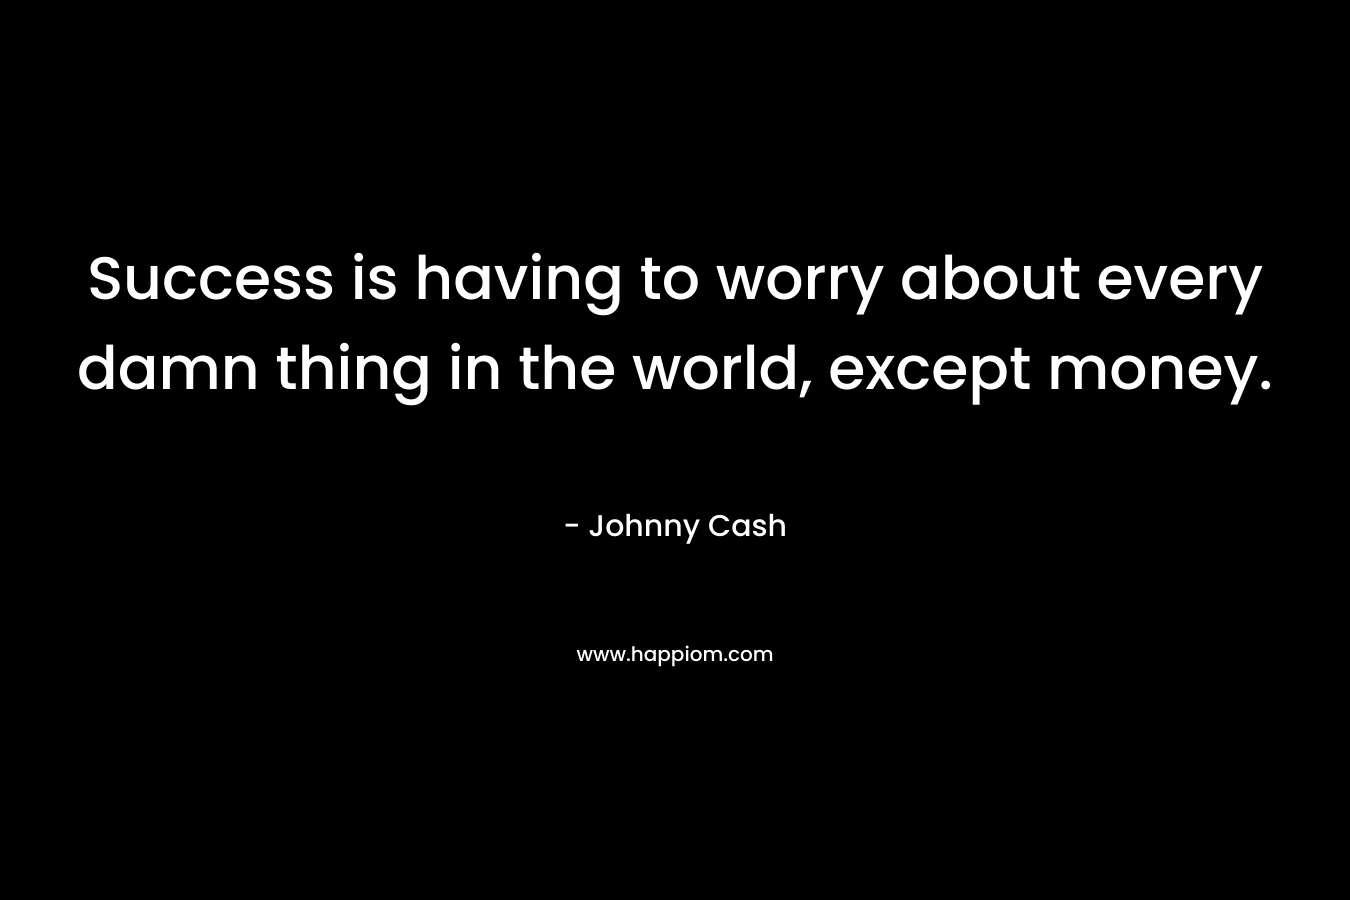 Success is having to worry about every damn thing in the world, except money. – Johnny Cash